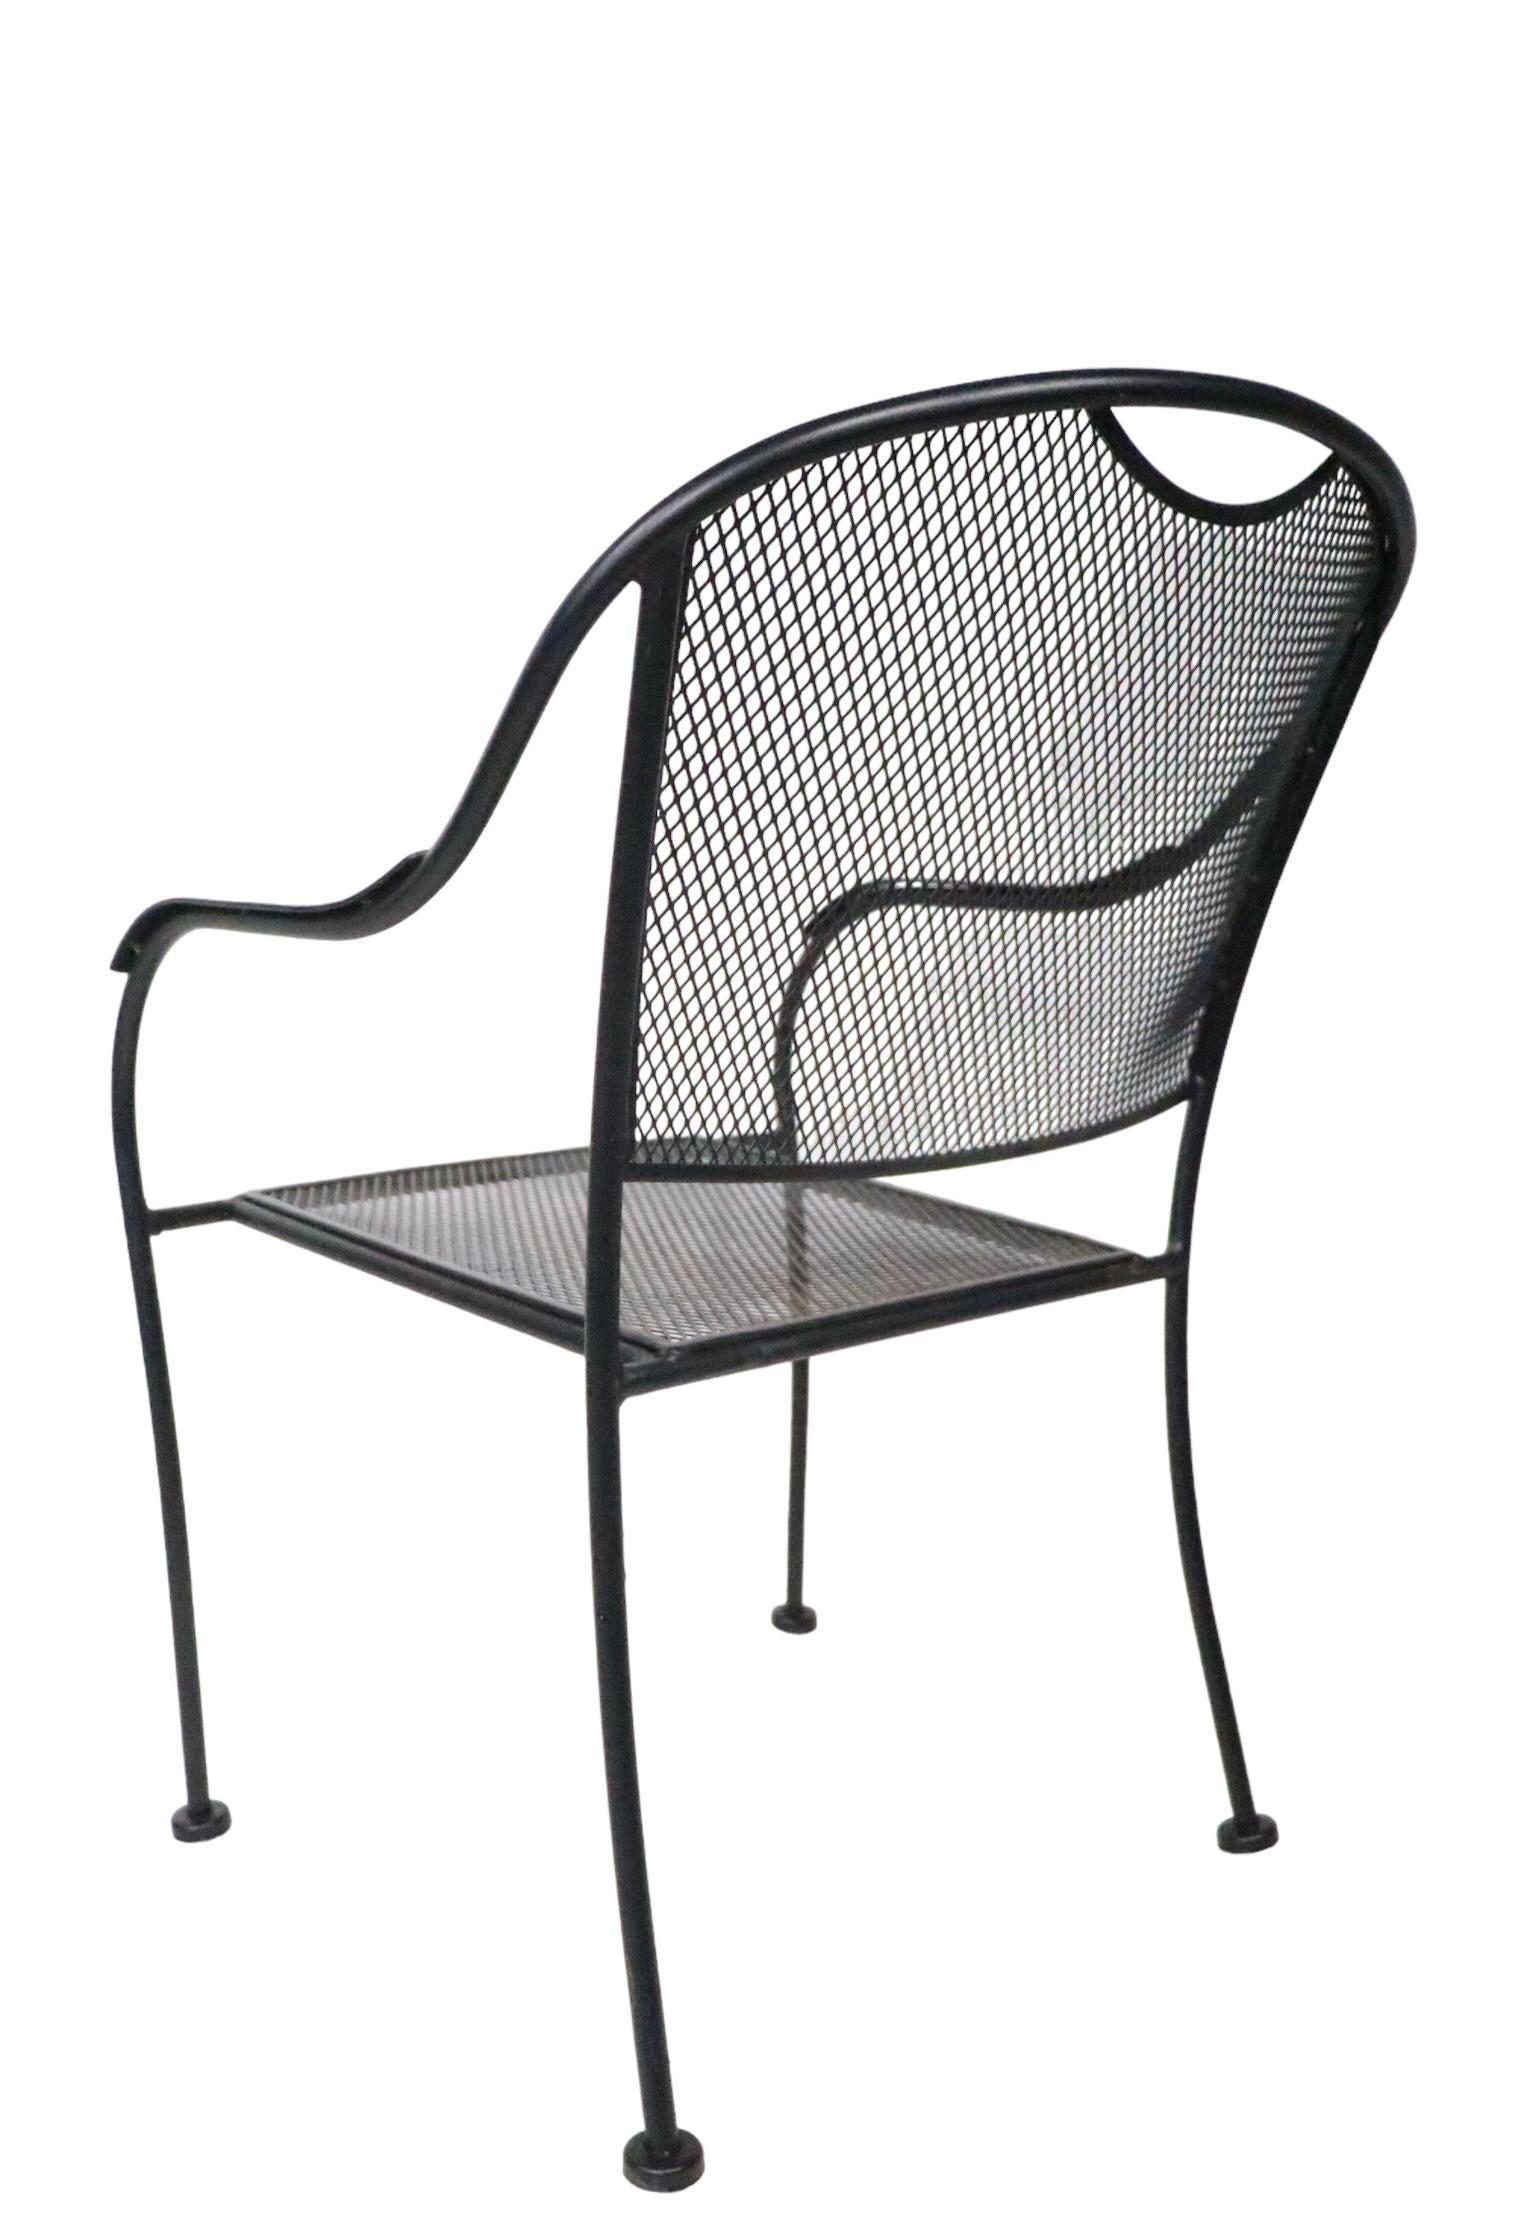 American Set of Four Modernist Metal Garden Patio Dining Chairs in the style of Woodard For Sale